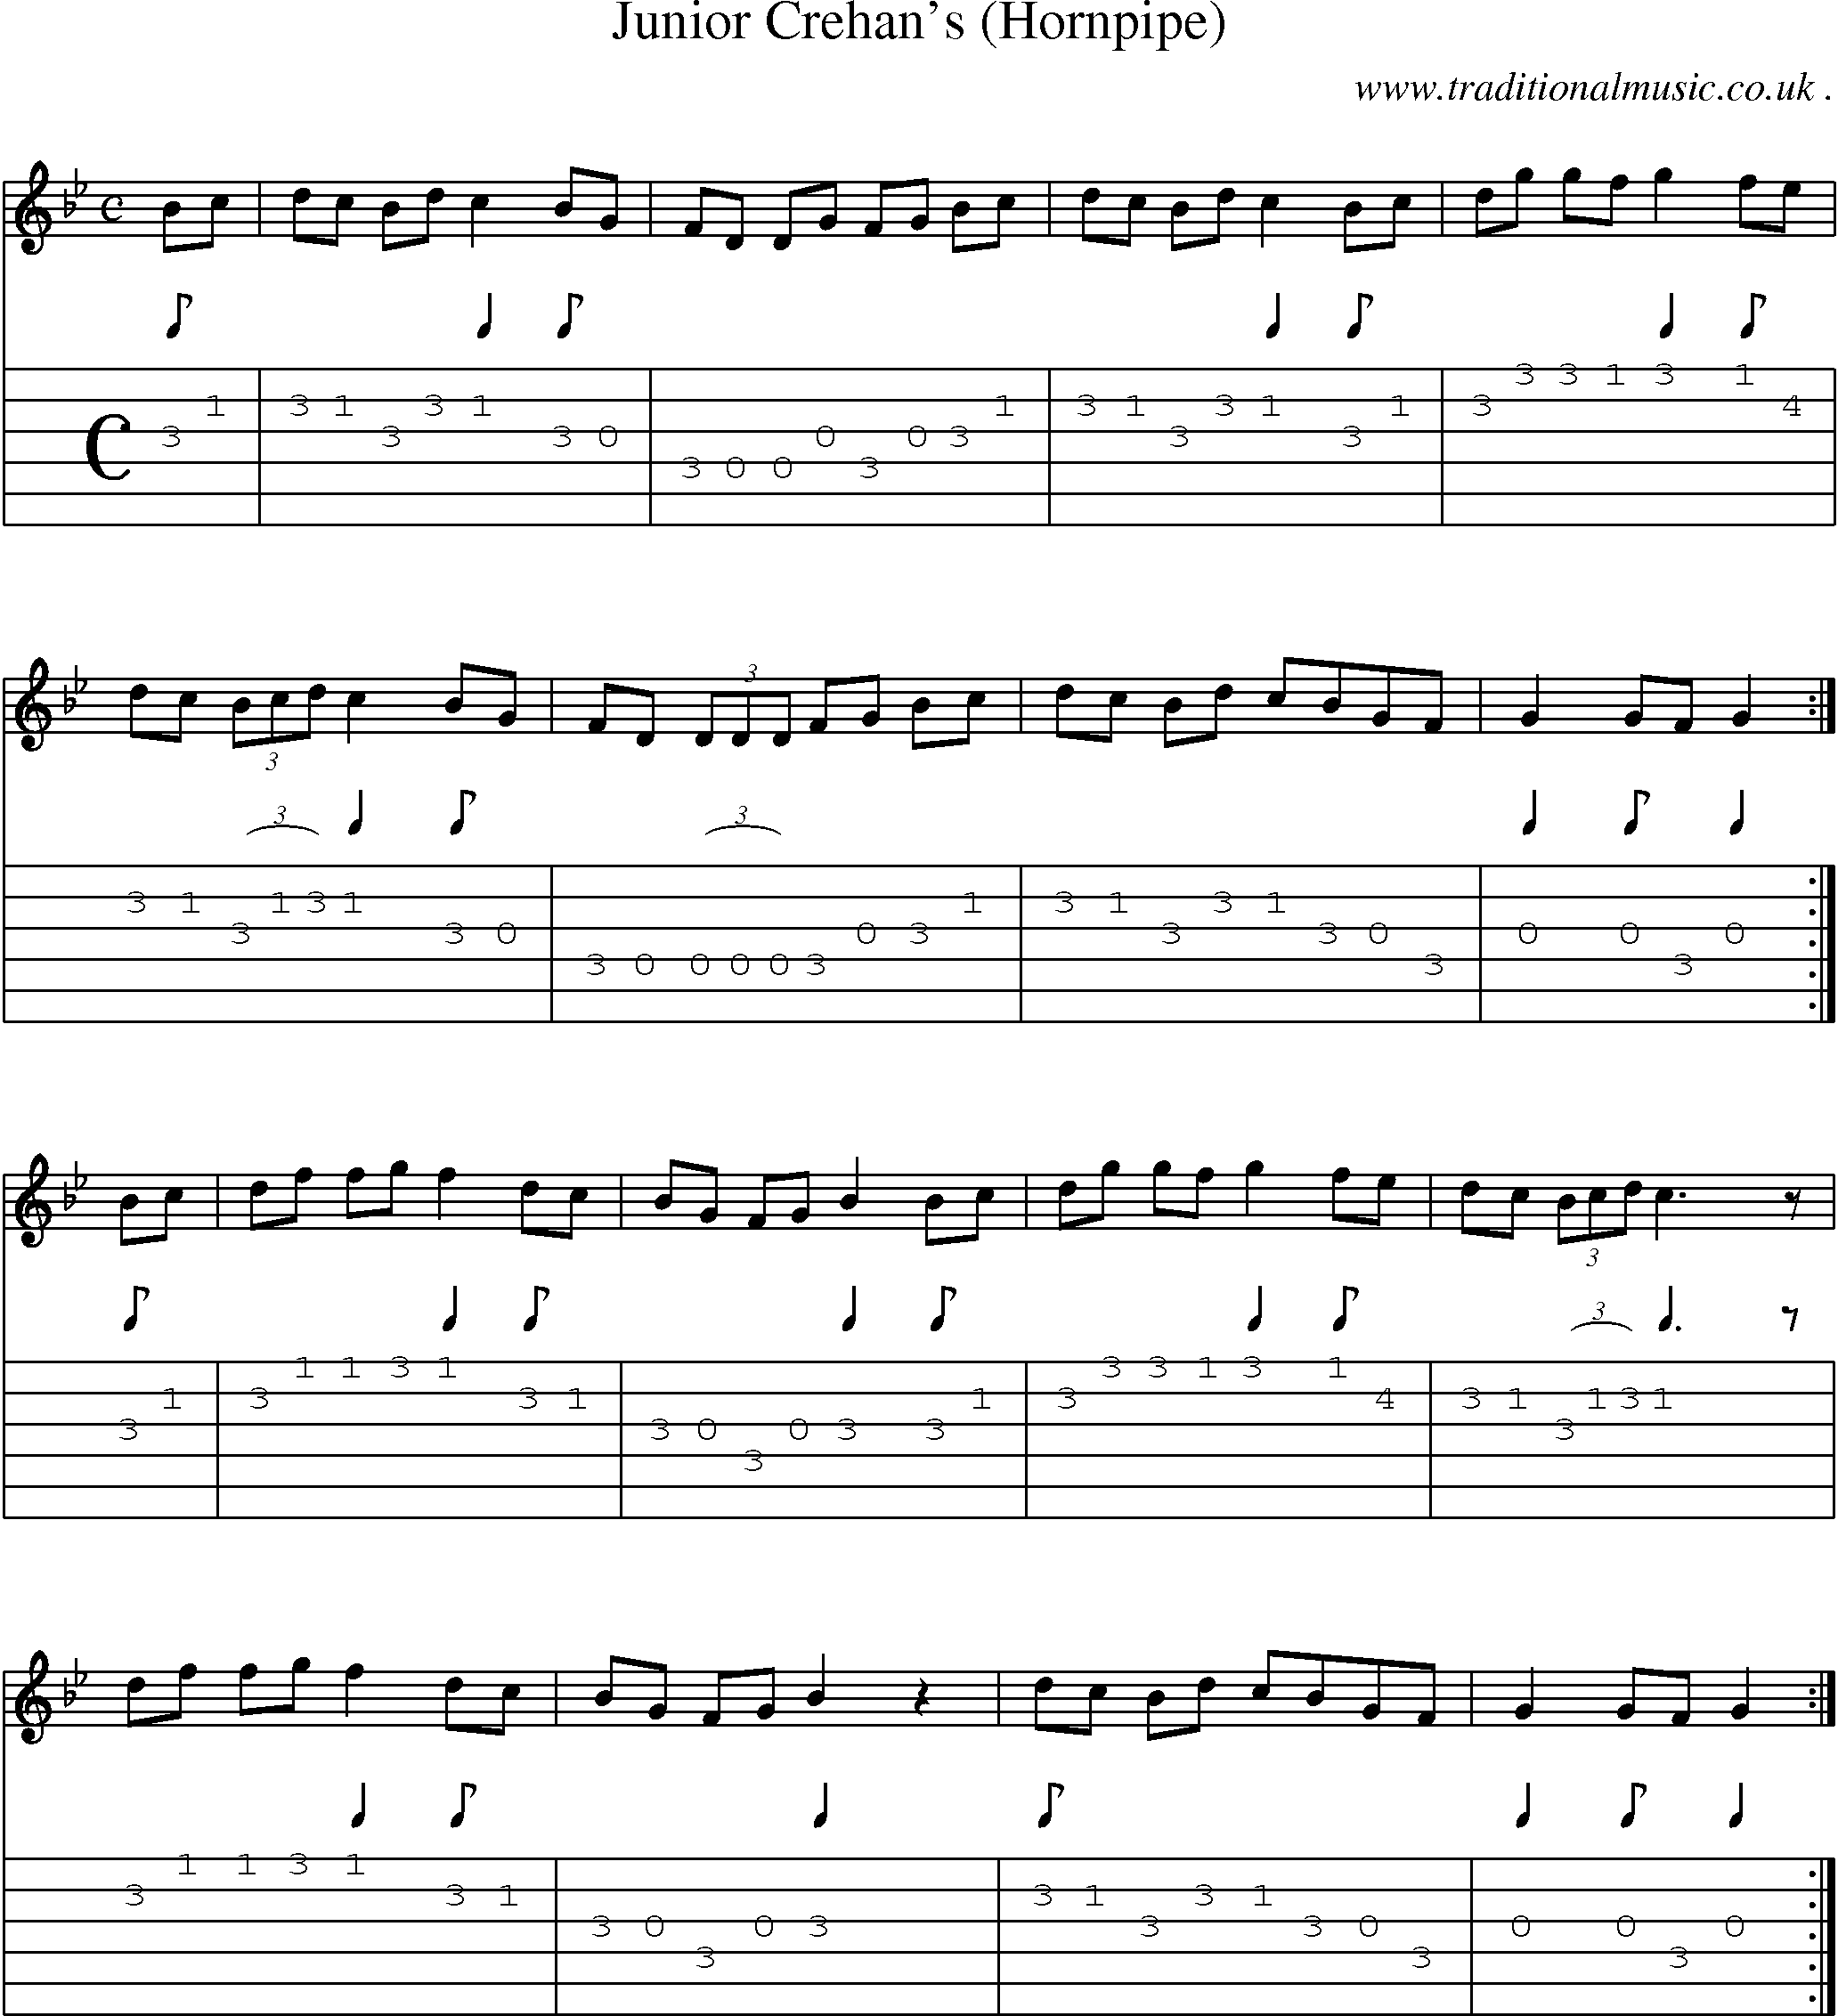 Sheet-Music and Guitar Tabs for Junior Crehans (hornpipe)